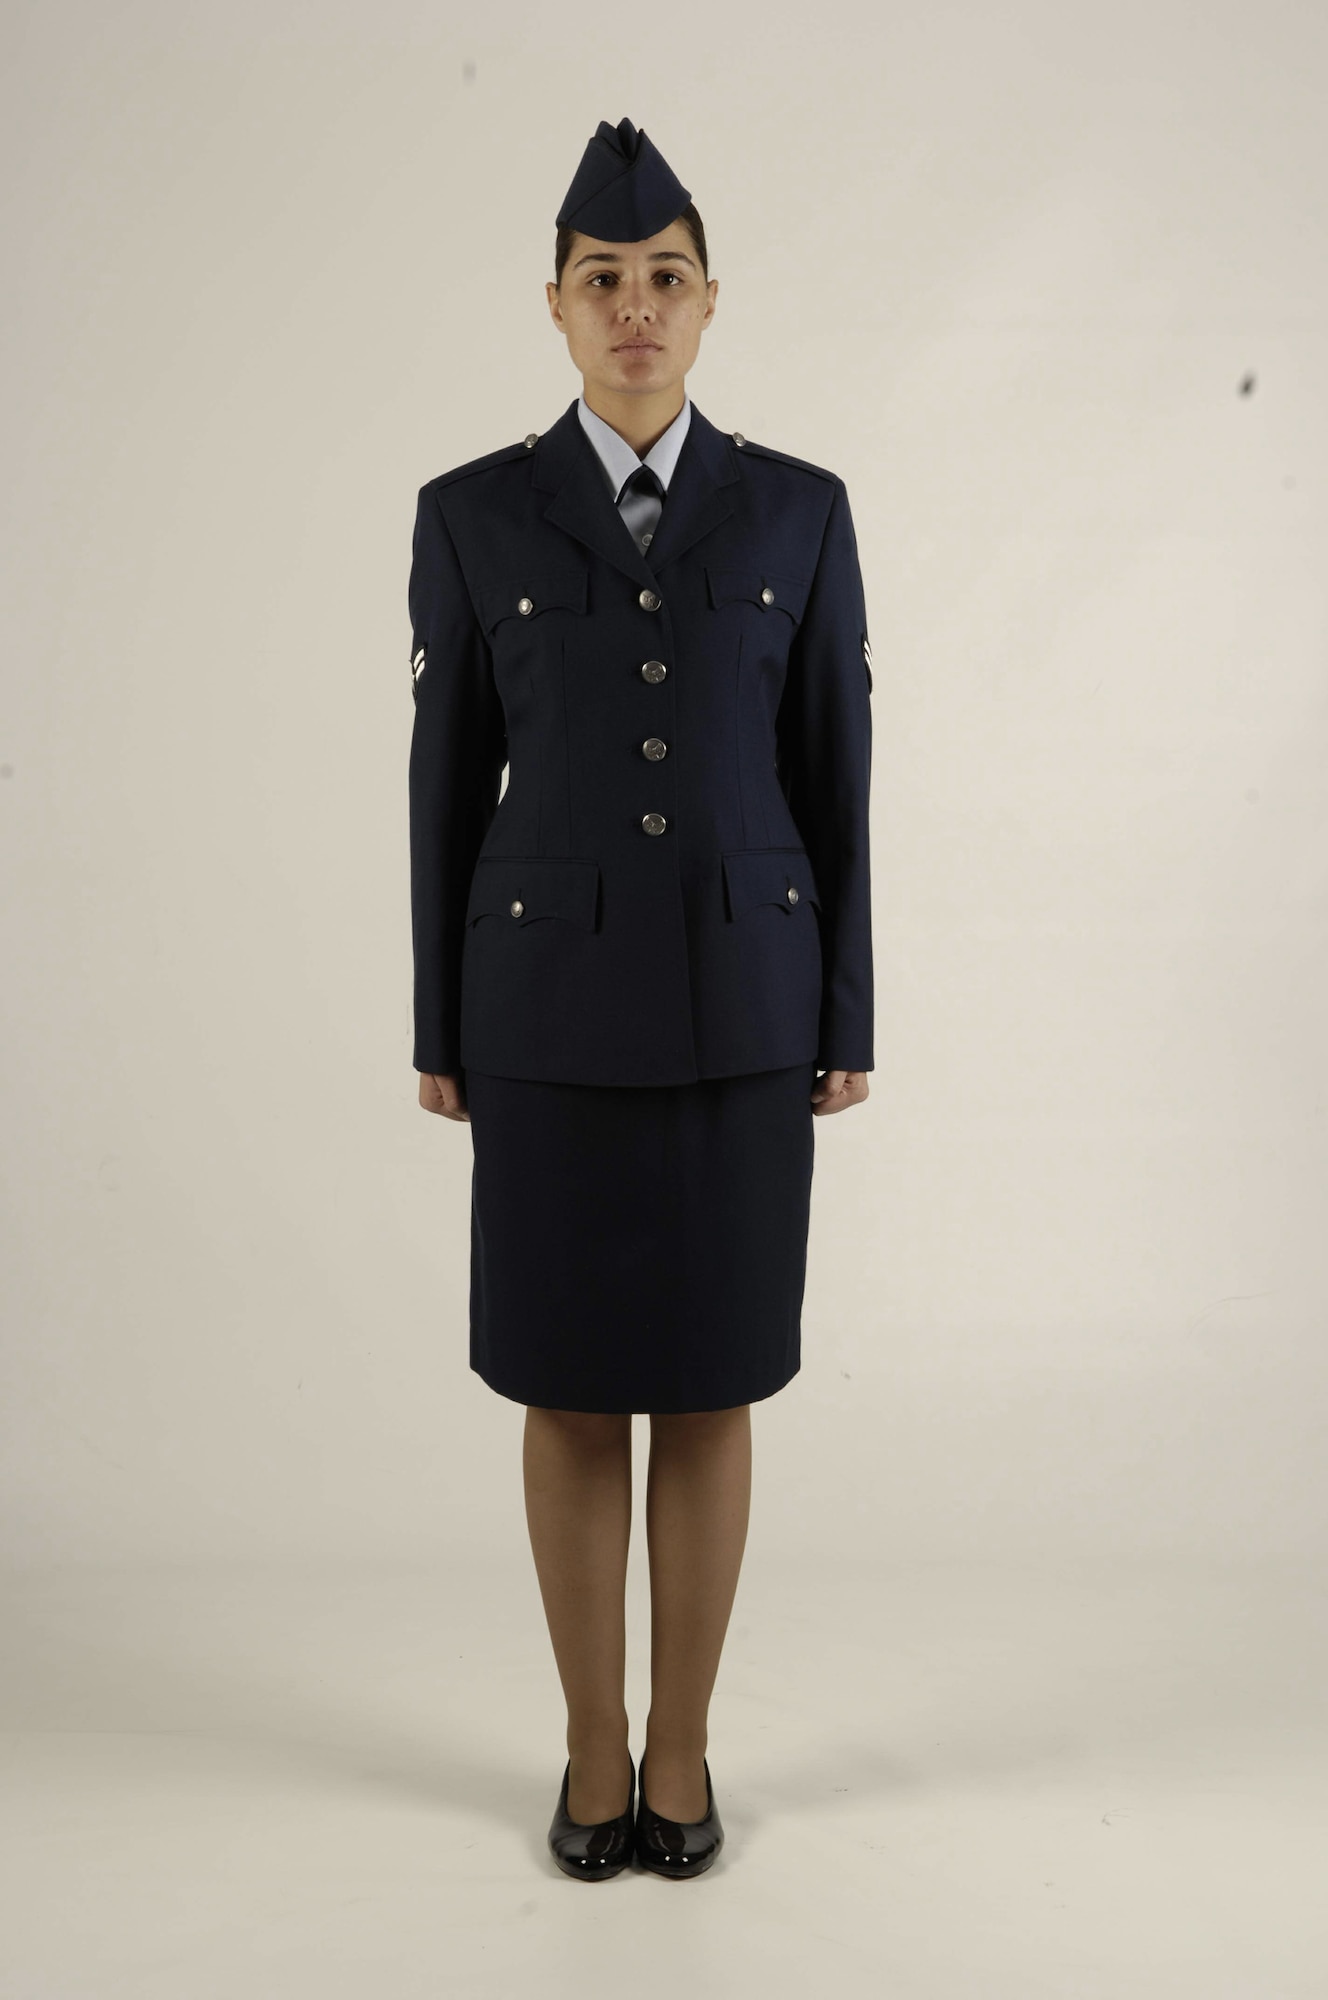 Officer and enlisted male and female participants wear-tested three variant issue designs of the proposed Heritage Coat. The differences between the coats were a fabric belt and slide buckle, the honor guard style belt and buckle, and the four-button, no belt style. (U.S. Air Force photo)